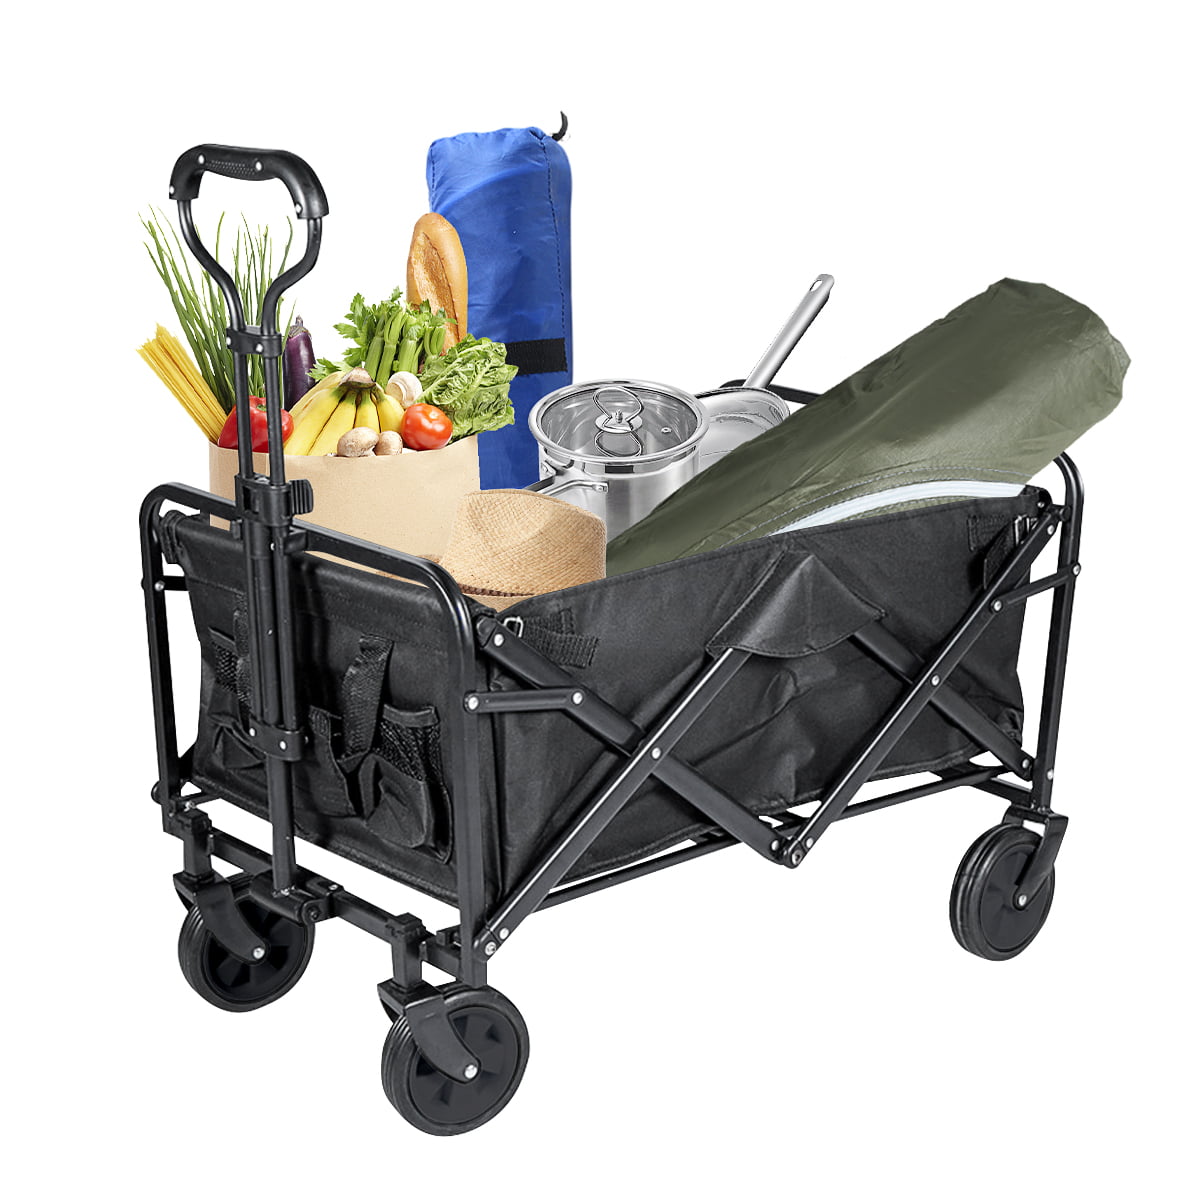 Outdoor Folding Wagon for Beach High Capacity Utility Grocery Cart with All-Terrain Wheels Garden Sports Hikenture Collapsible Wagon Cart Shopping and Camping Portable Heavy Duty Beach Wagon 